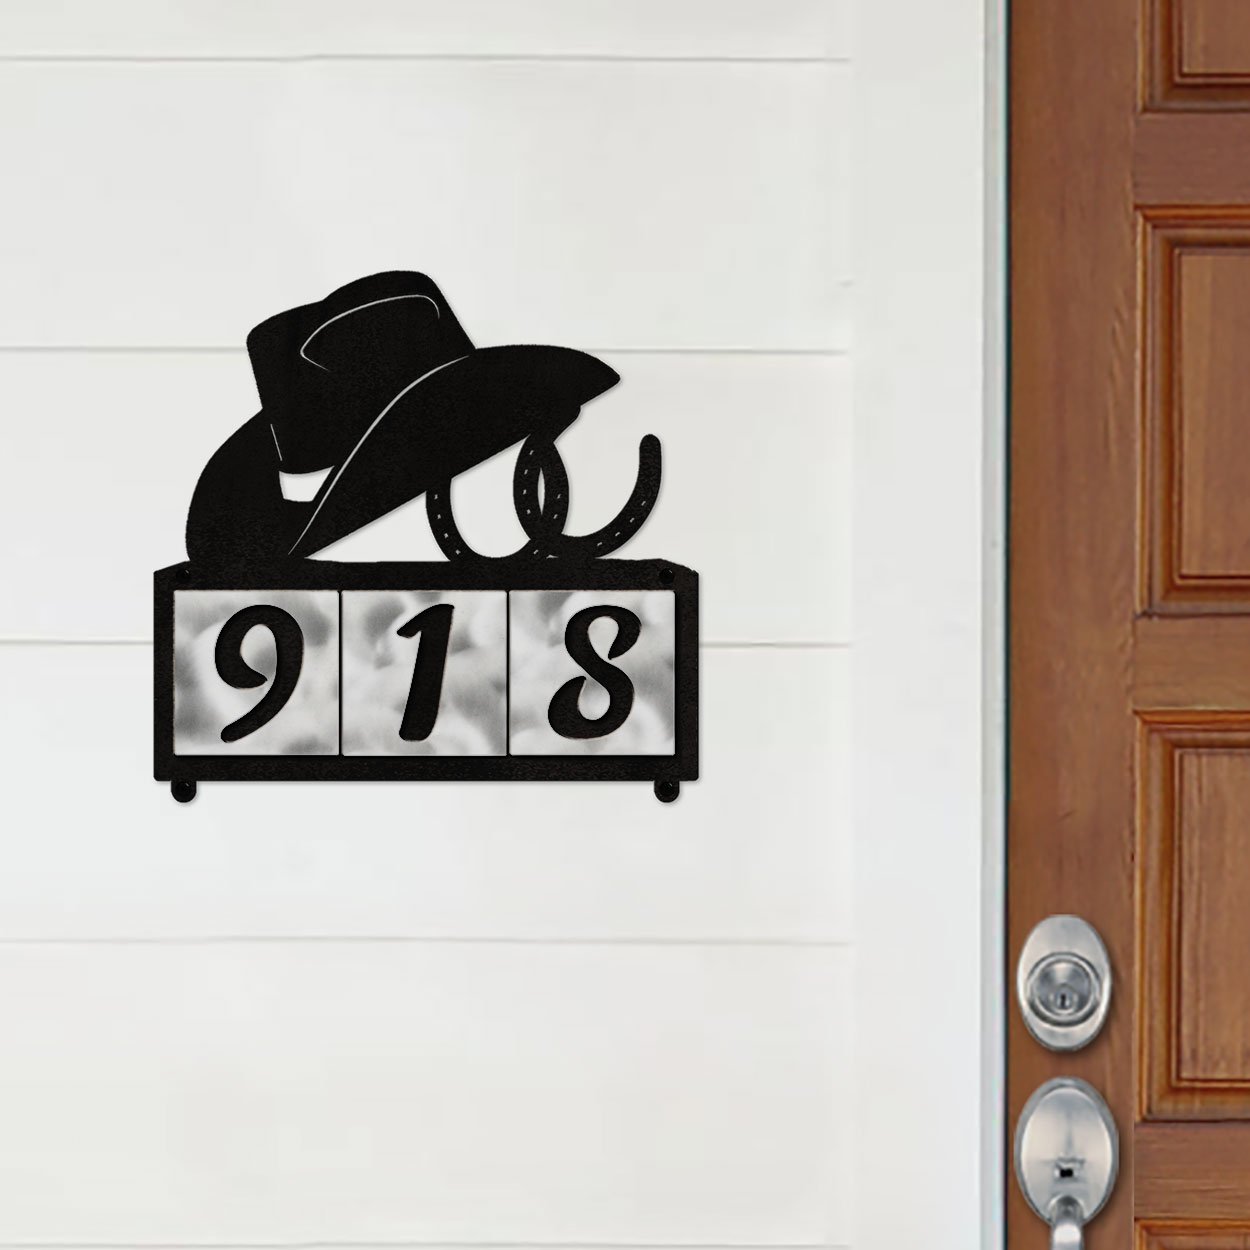 607043 - Cowboy Hat and Horseshoes Design 3-Digit Horizontal 4-inch Tile Outdoor House Numbers